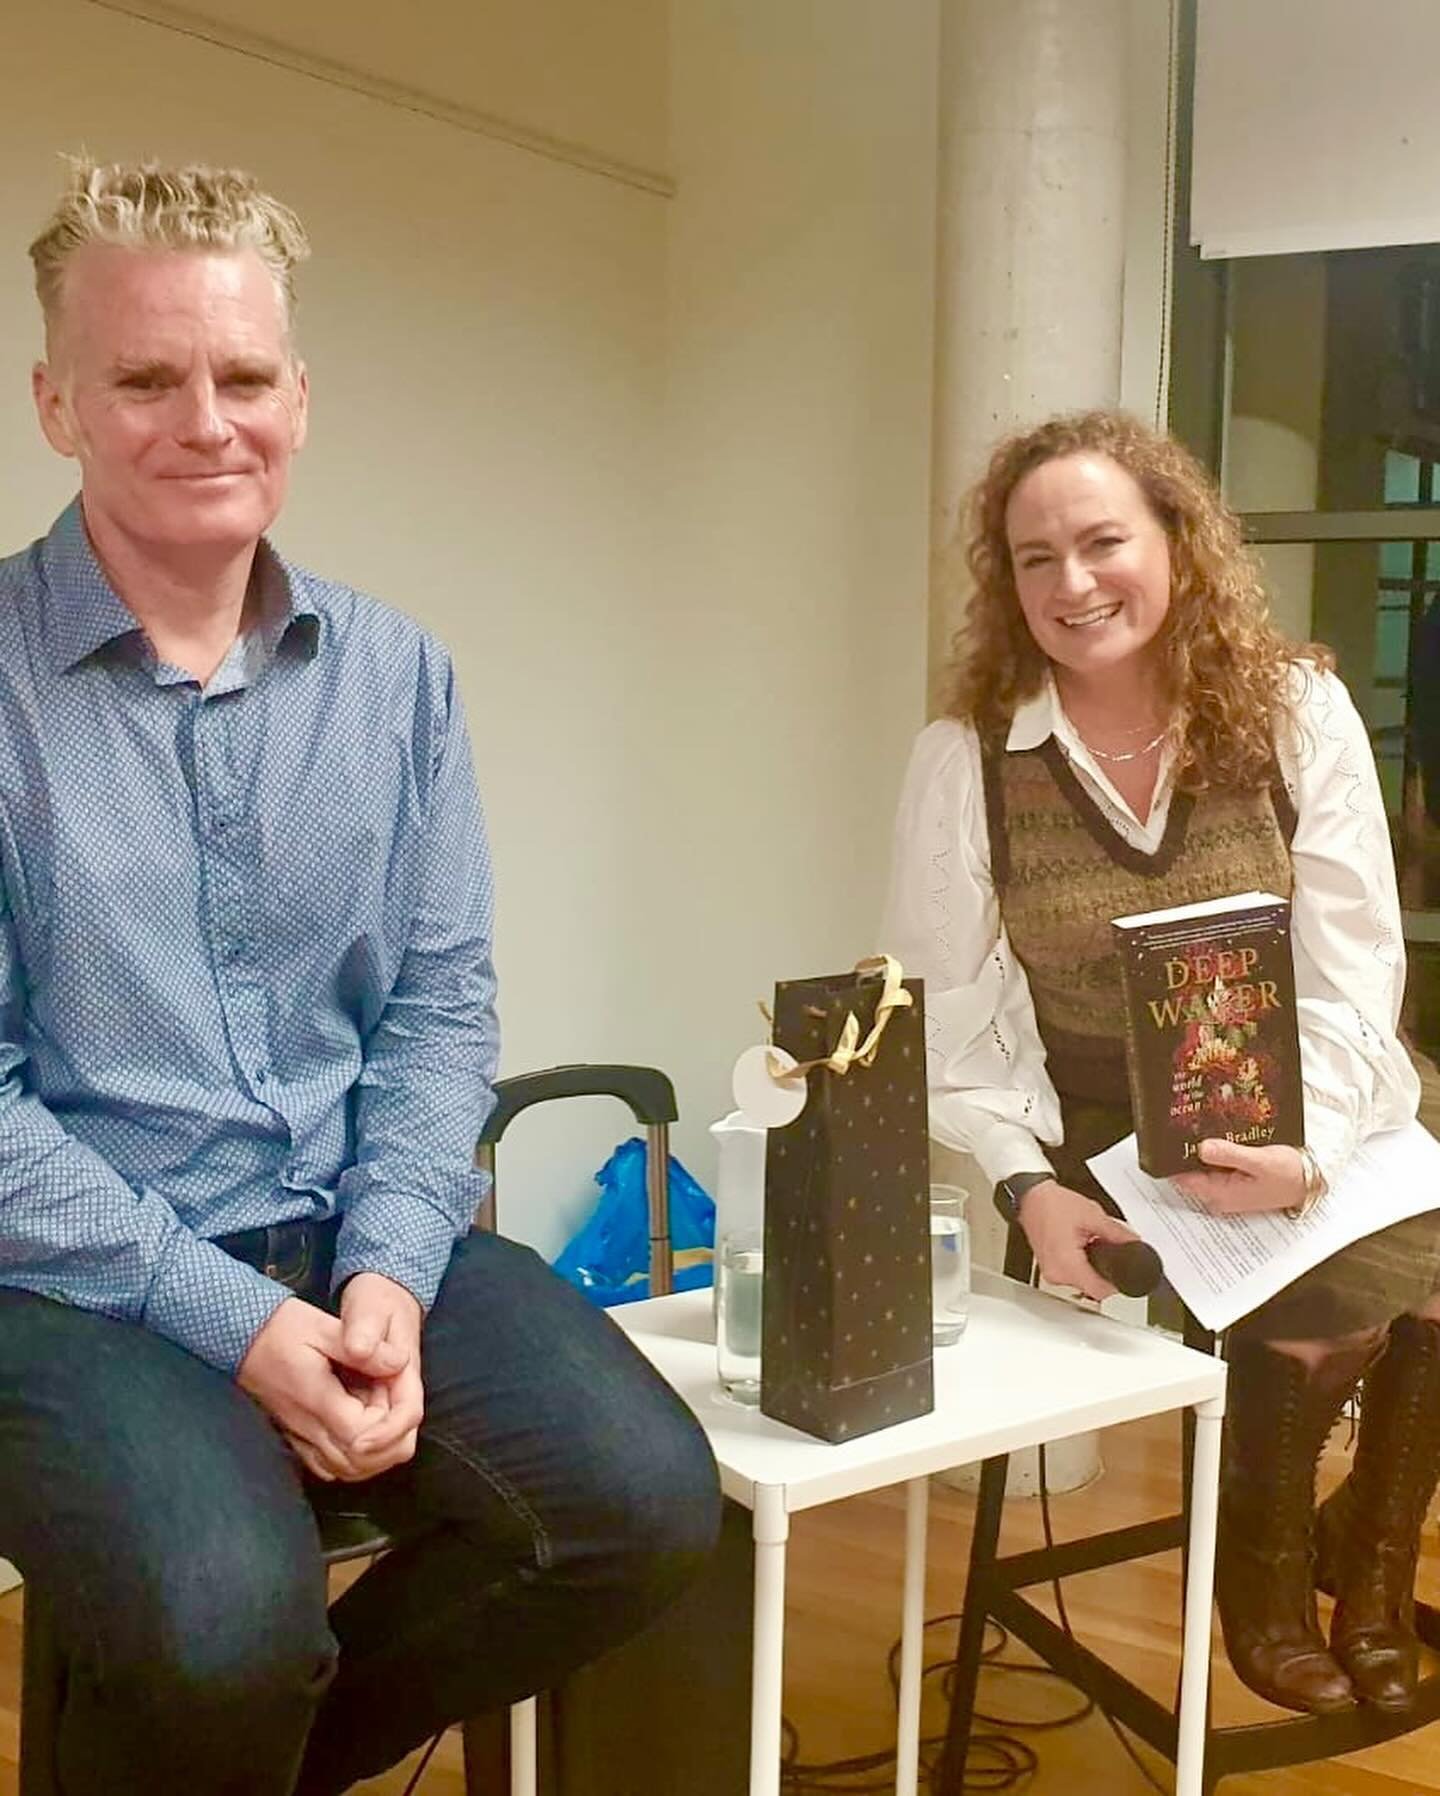 Such a pleasure to be in conversation with a writer like James Bradley @ghostspecies at @avaloncommunitylibrary last night. His latest book #DeepWater is revelatory, moving and generally surprising in so many ways, I&rsquo;m in awe at what he&rsquo;s